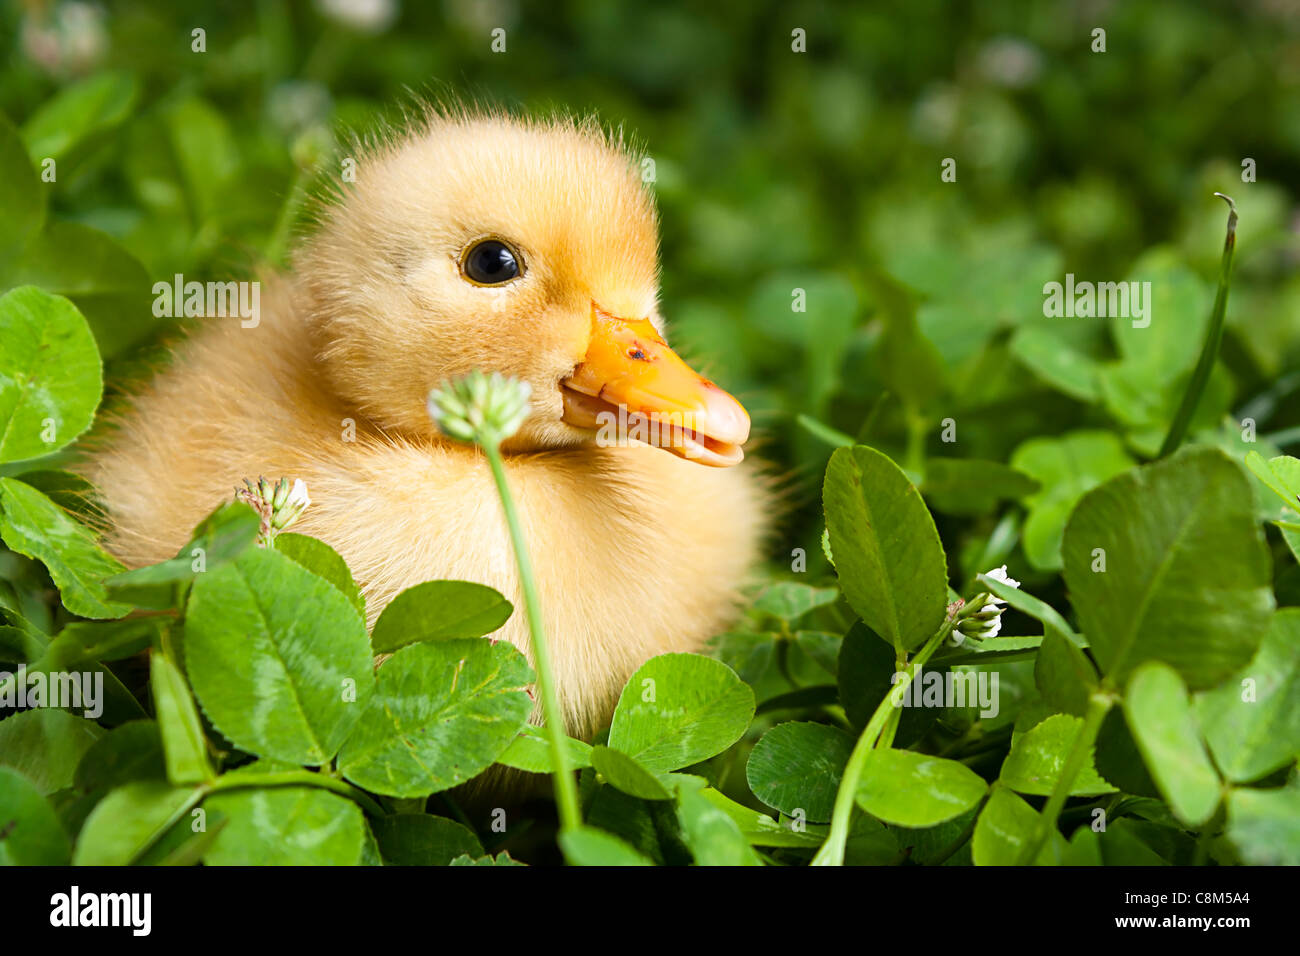 Baby duckling in a field of clover Stock Photo